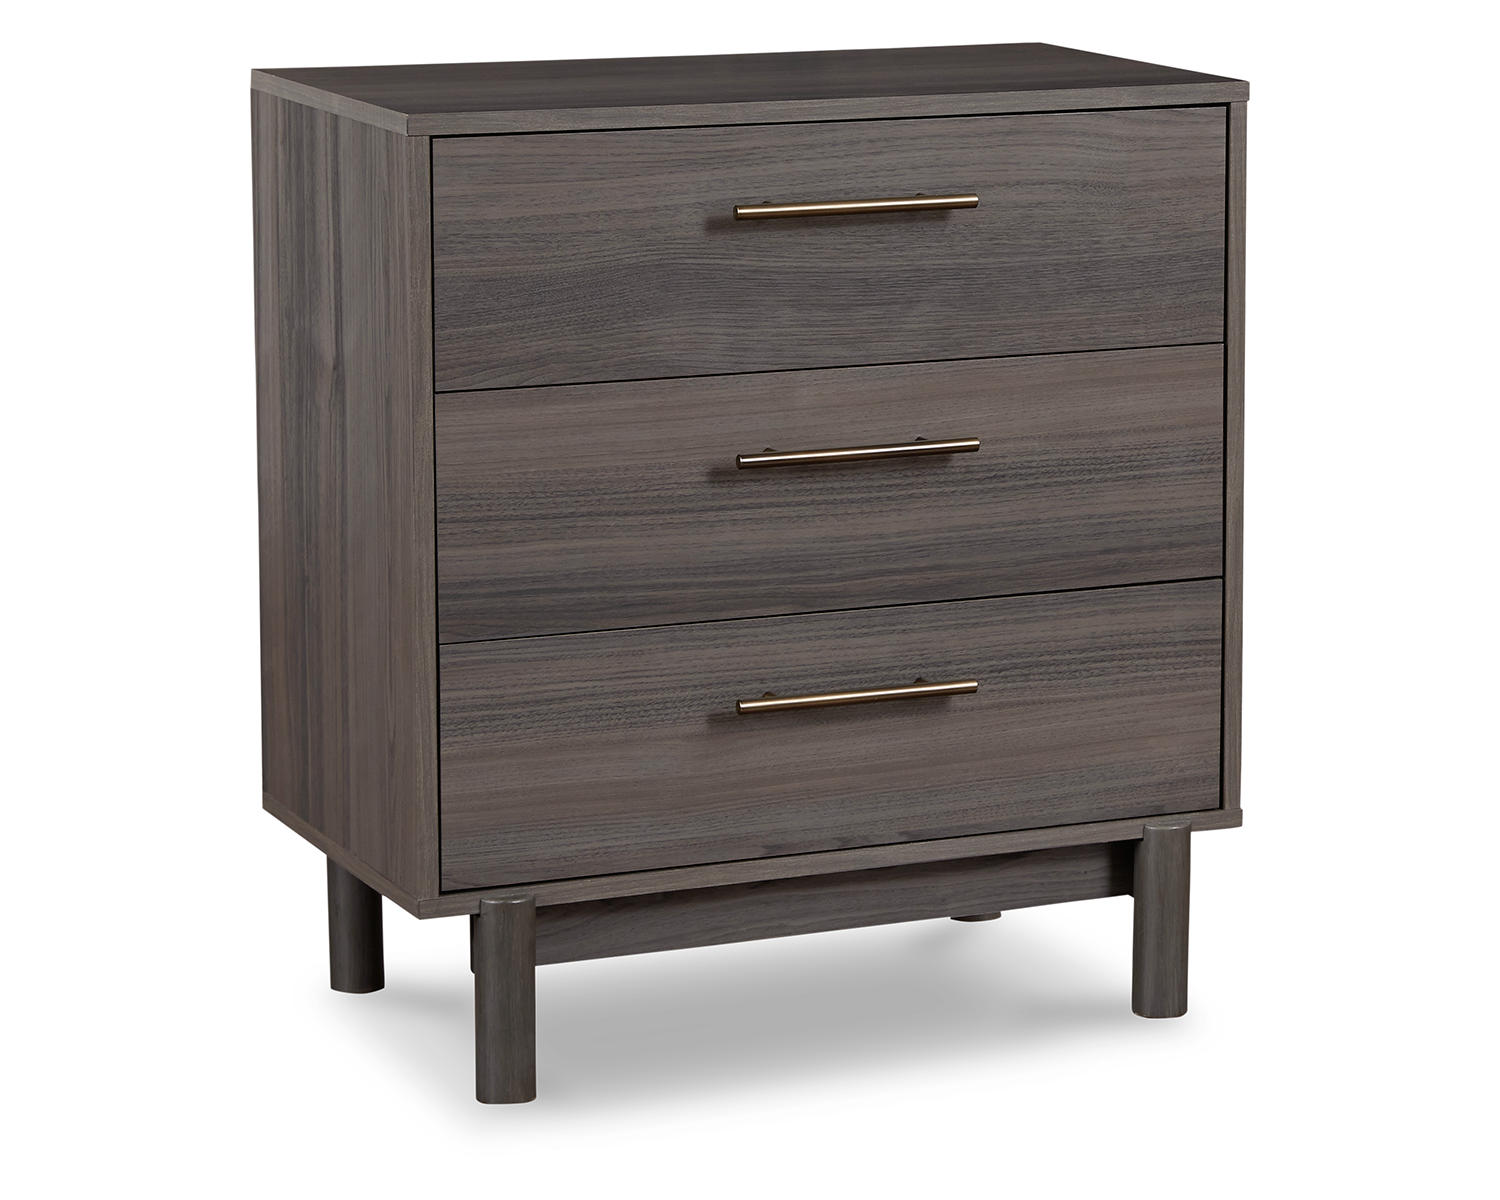 Signature Design by Ashley Brymont Mid-Century Modern 3 Drawer Chest of Drawers, Dark Gray - image 1 of 6